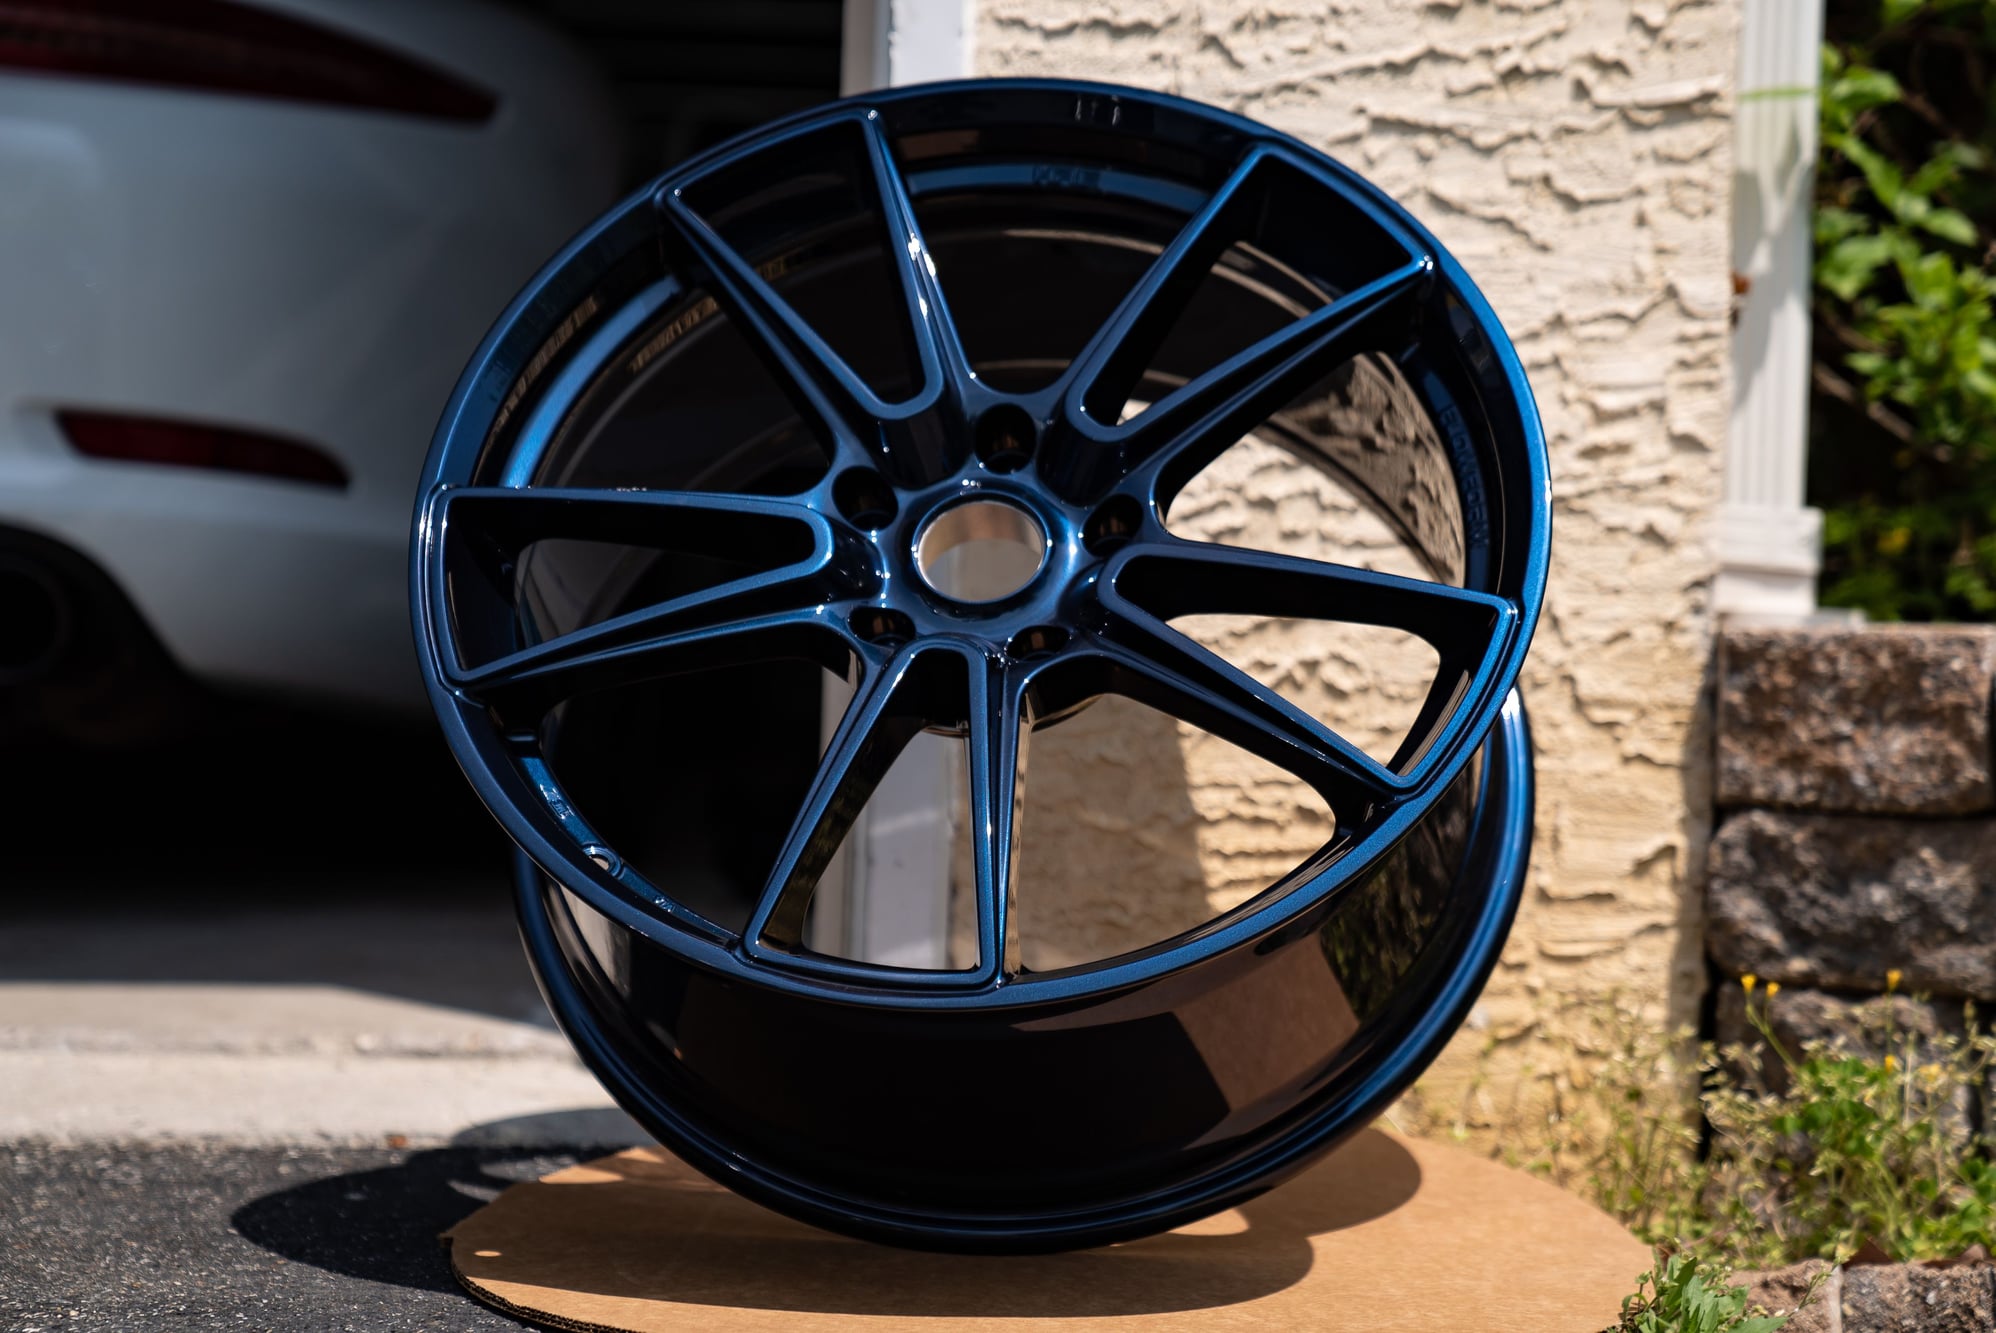 Wheels and Tires/Axles - 20" HRE FF04 Deep Sea Blue Wheels - Used - 2013 to 2019 Porsche 911 - Middletown, DE 19709, United States